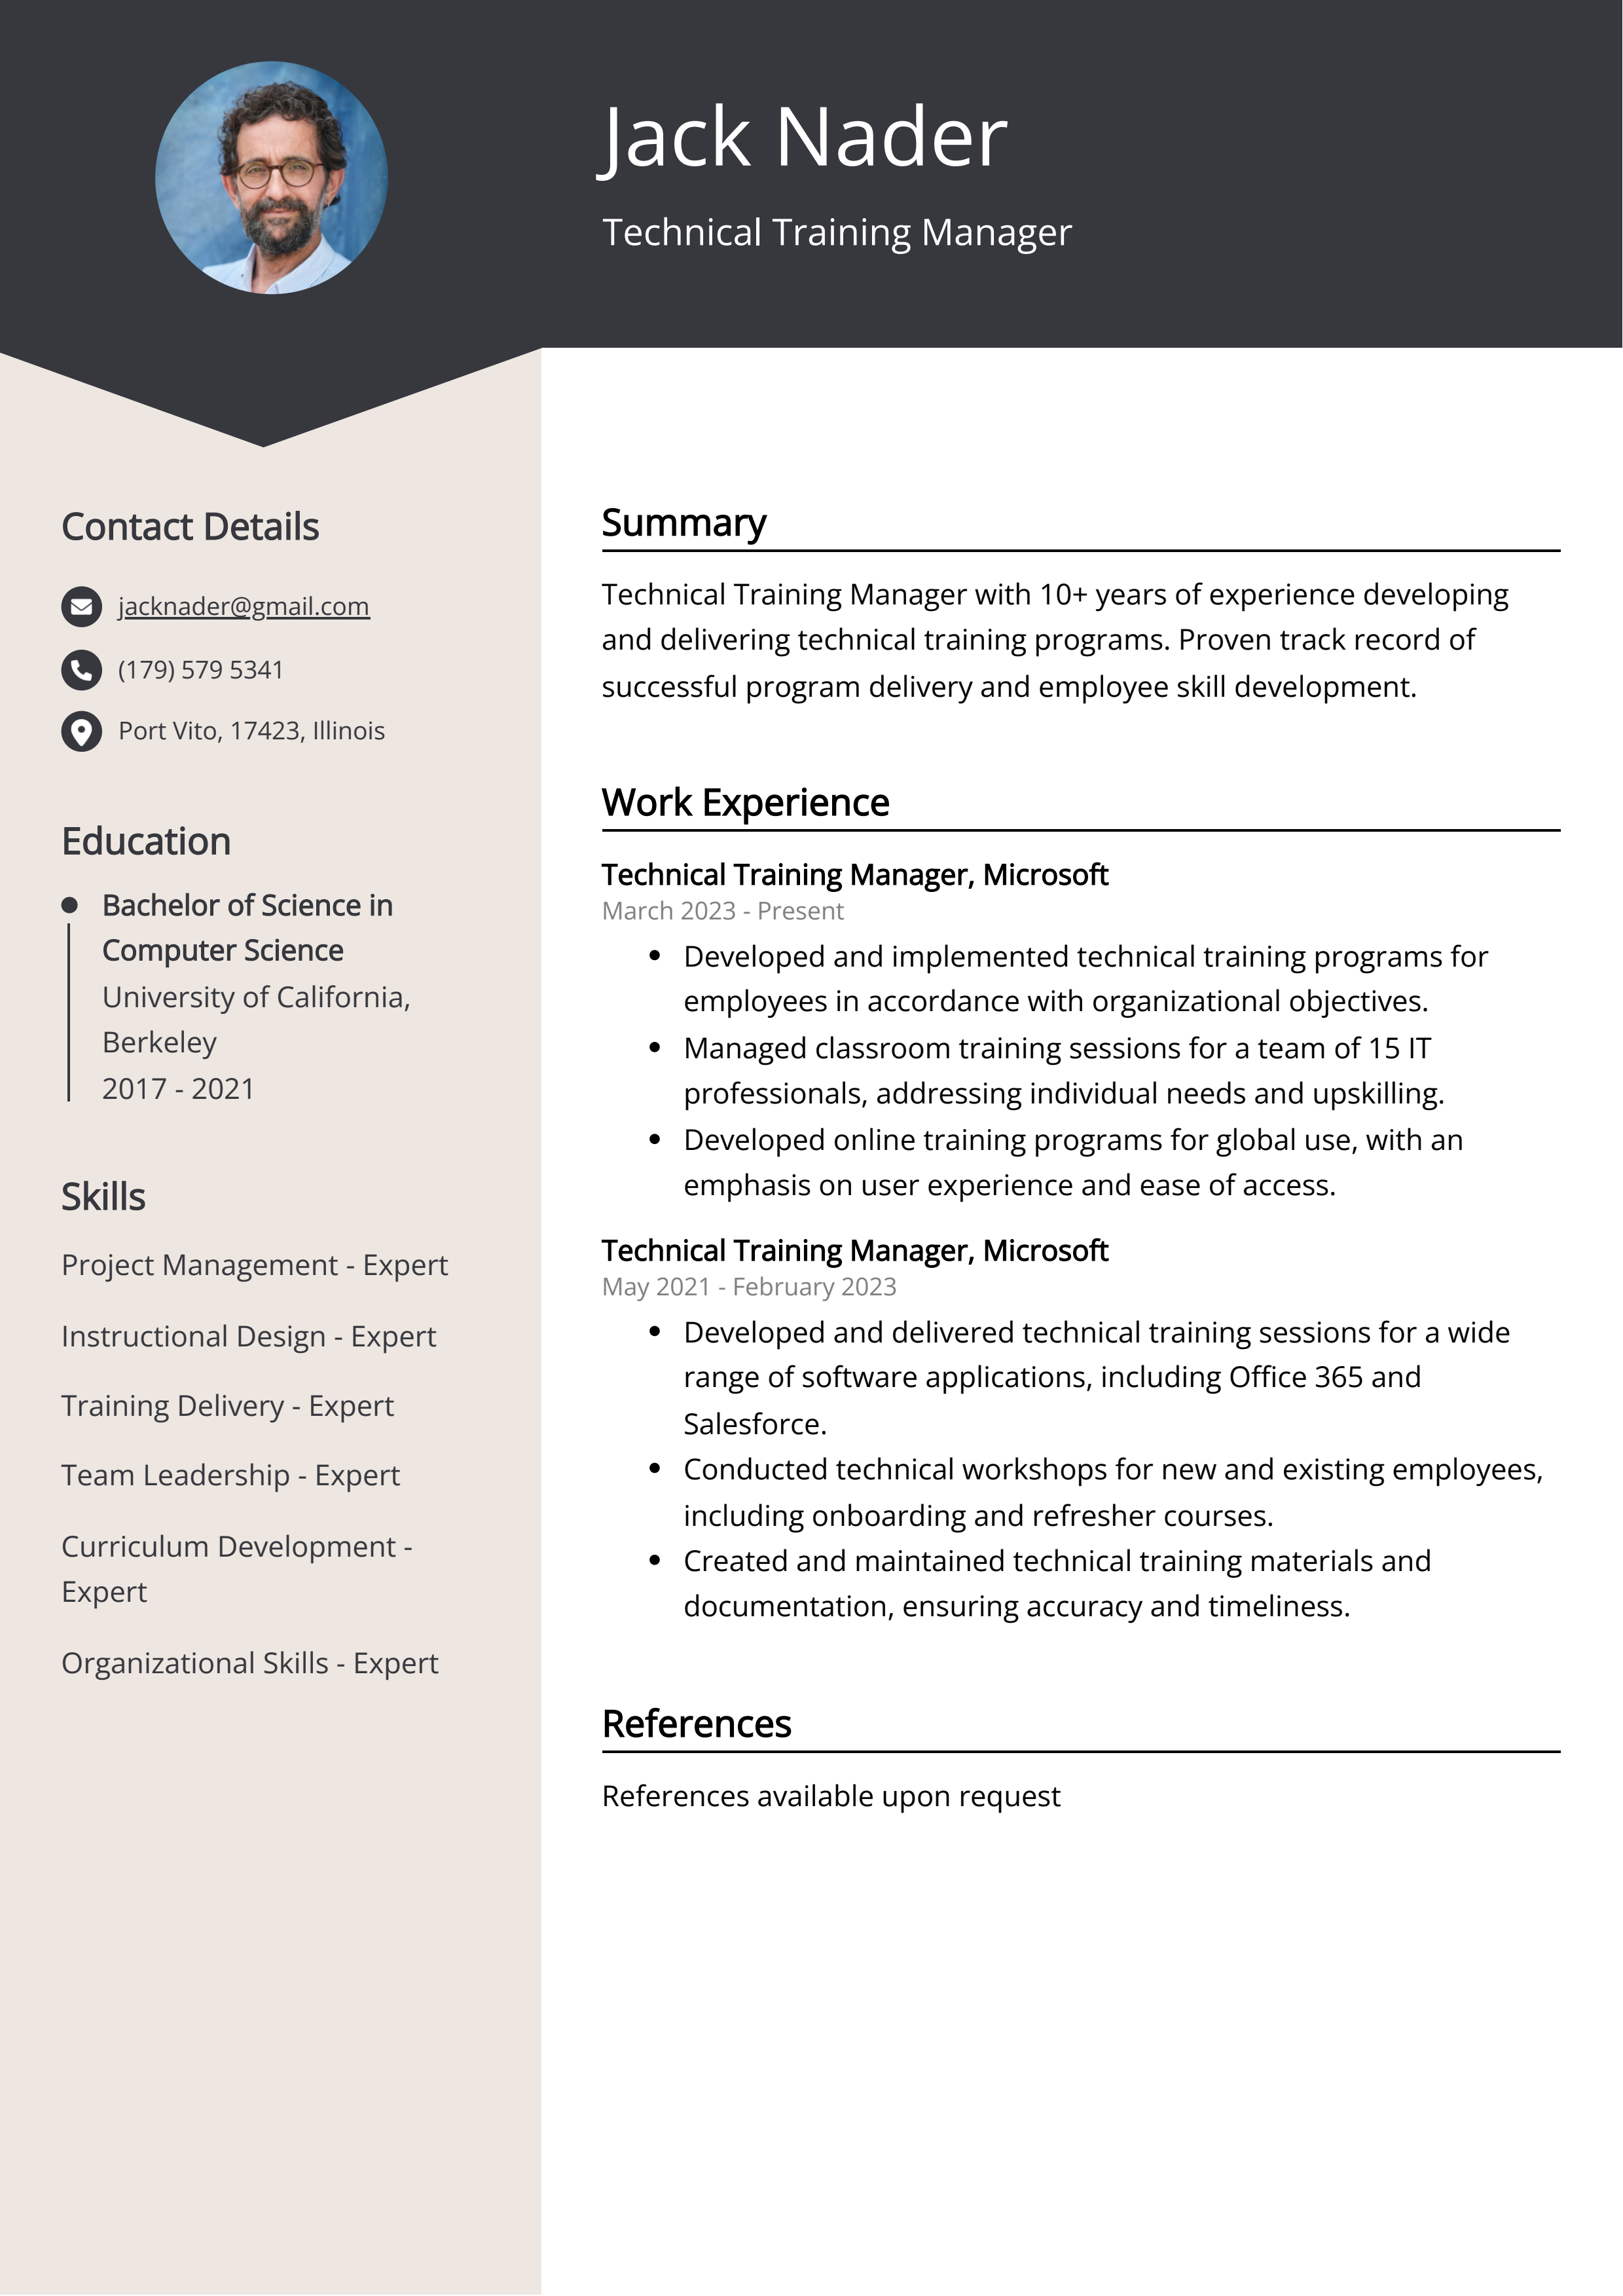 Technical Training Manager CV Example